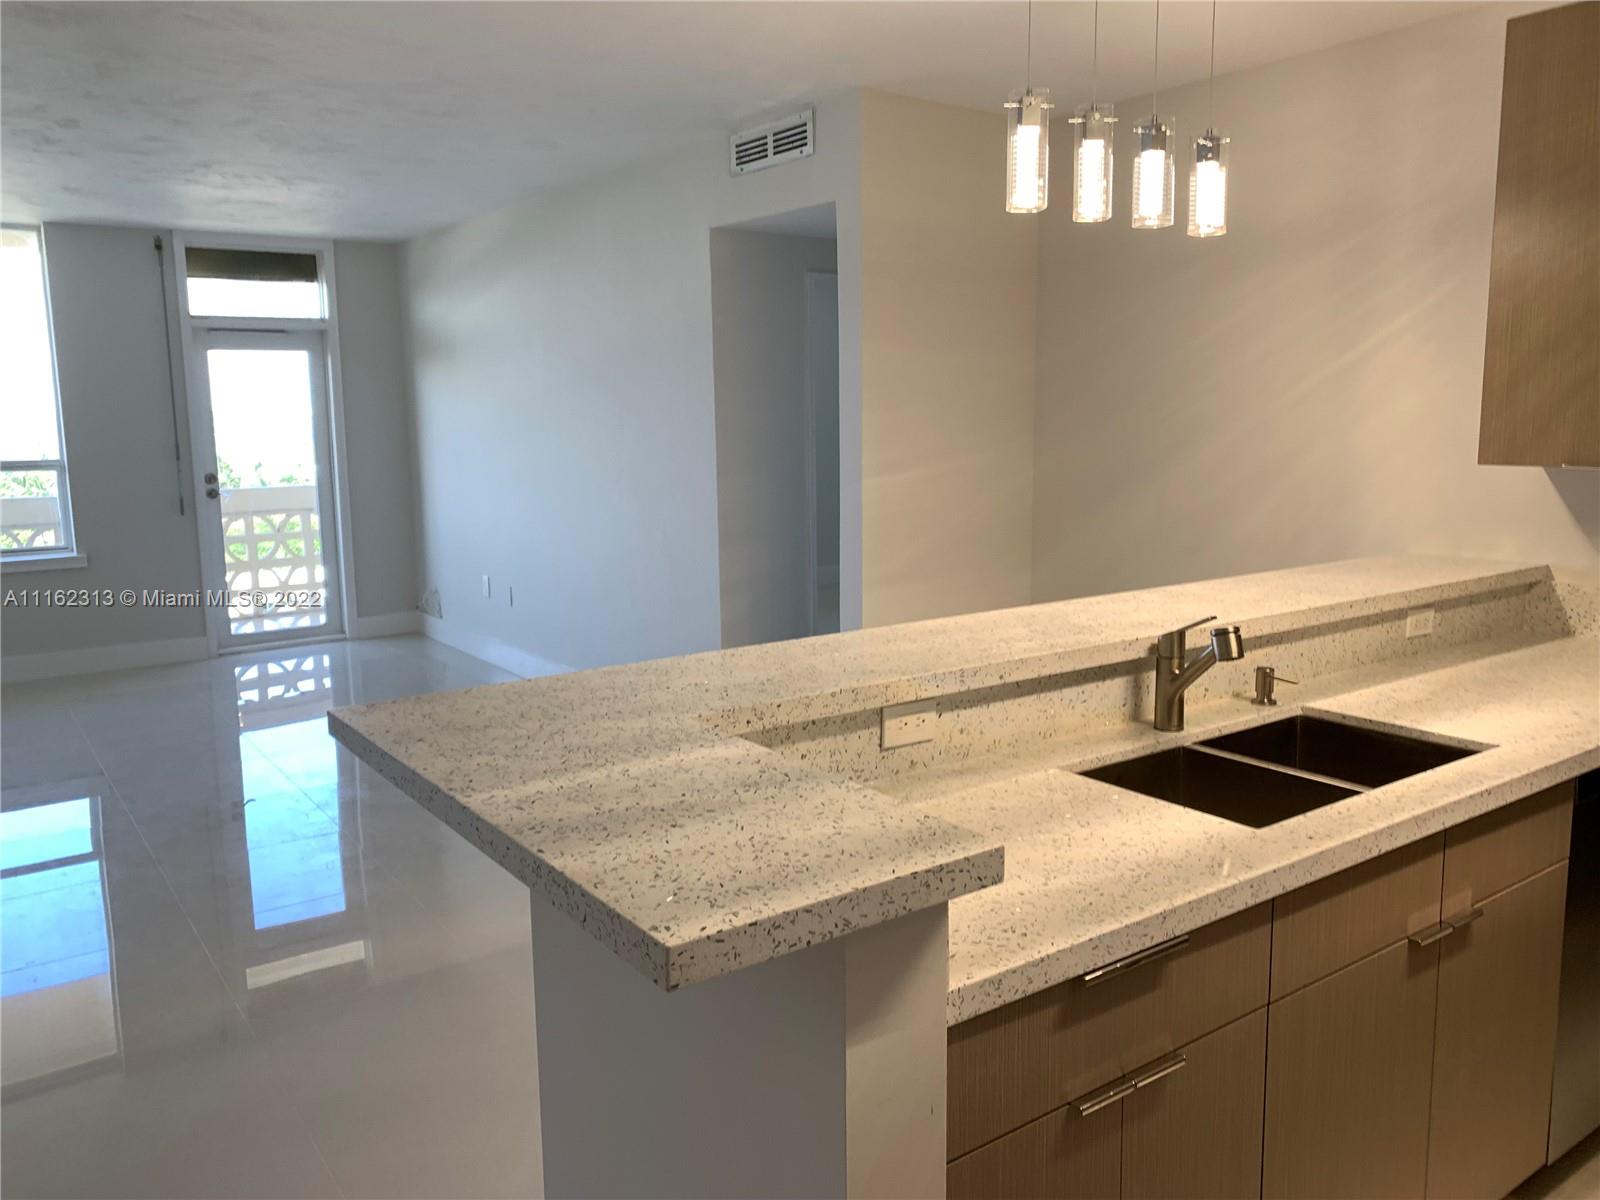 Completely renovated unit in an oceanfront building in Bal Harbor. 1 bedroom + den that can easily be used as a 2nd bedroom w/ 2 full bath. The unit was remodeled from top to bottom with all fine luxury finishes, which include a made to order designer kitchen cabinetry with fashionable stone countertops, stainless steel appliances, Moet faucets. The master bed has a master bath fitted with a Toto toilet/bidet and oversized shower which includes state of the art fixtures. The 2nd bathroom has a tub. Gorgeous porcelain floors. Expensive light fixtures. This line has largest balcony. There are so many lovely features, but nothing compares to the breathtaking lovely sunset views. OWNER FINANCING AVAILABLE! The last 1 bedroom/Den sold in the Plaza went for $620,000. Dont miss this opportunity.